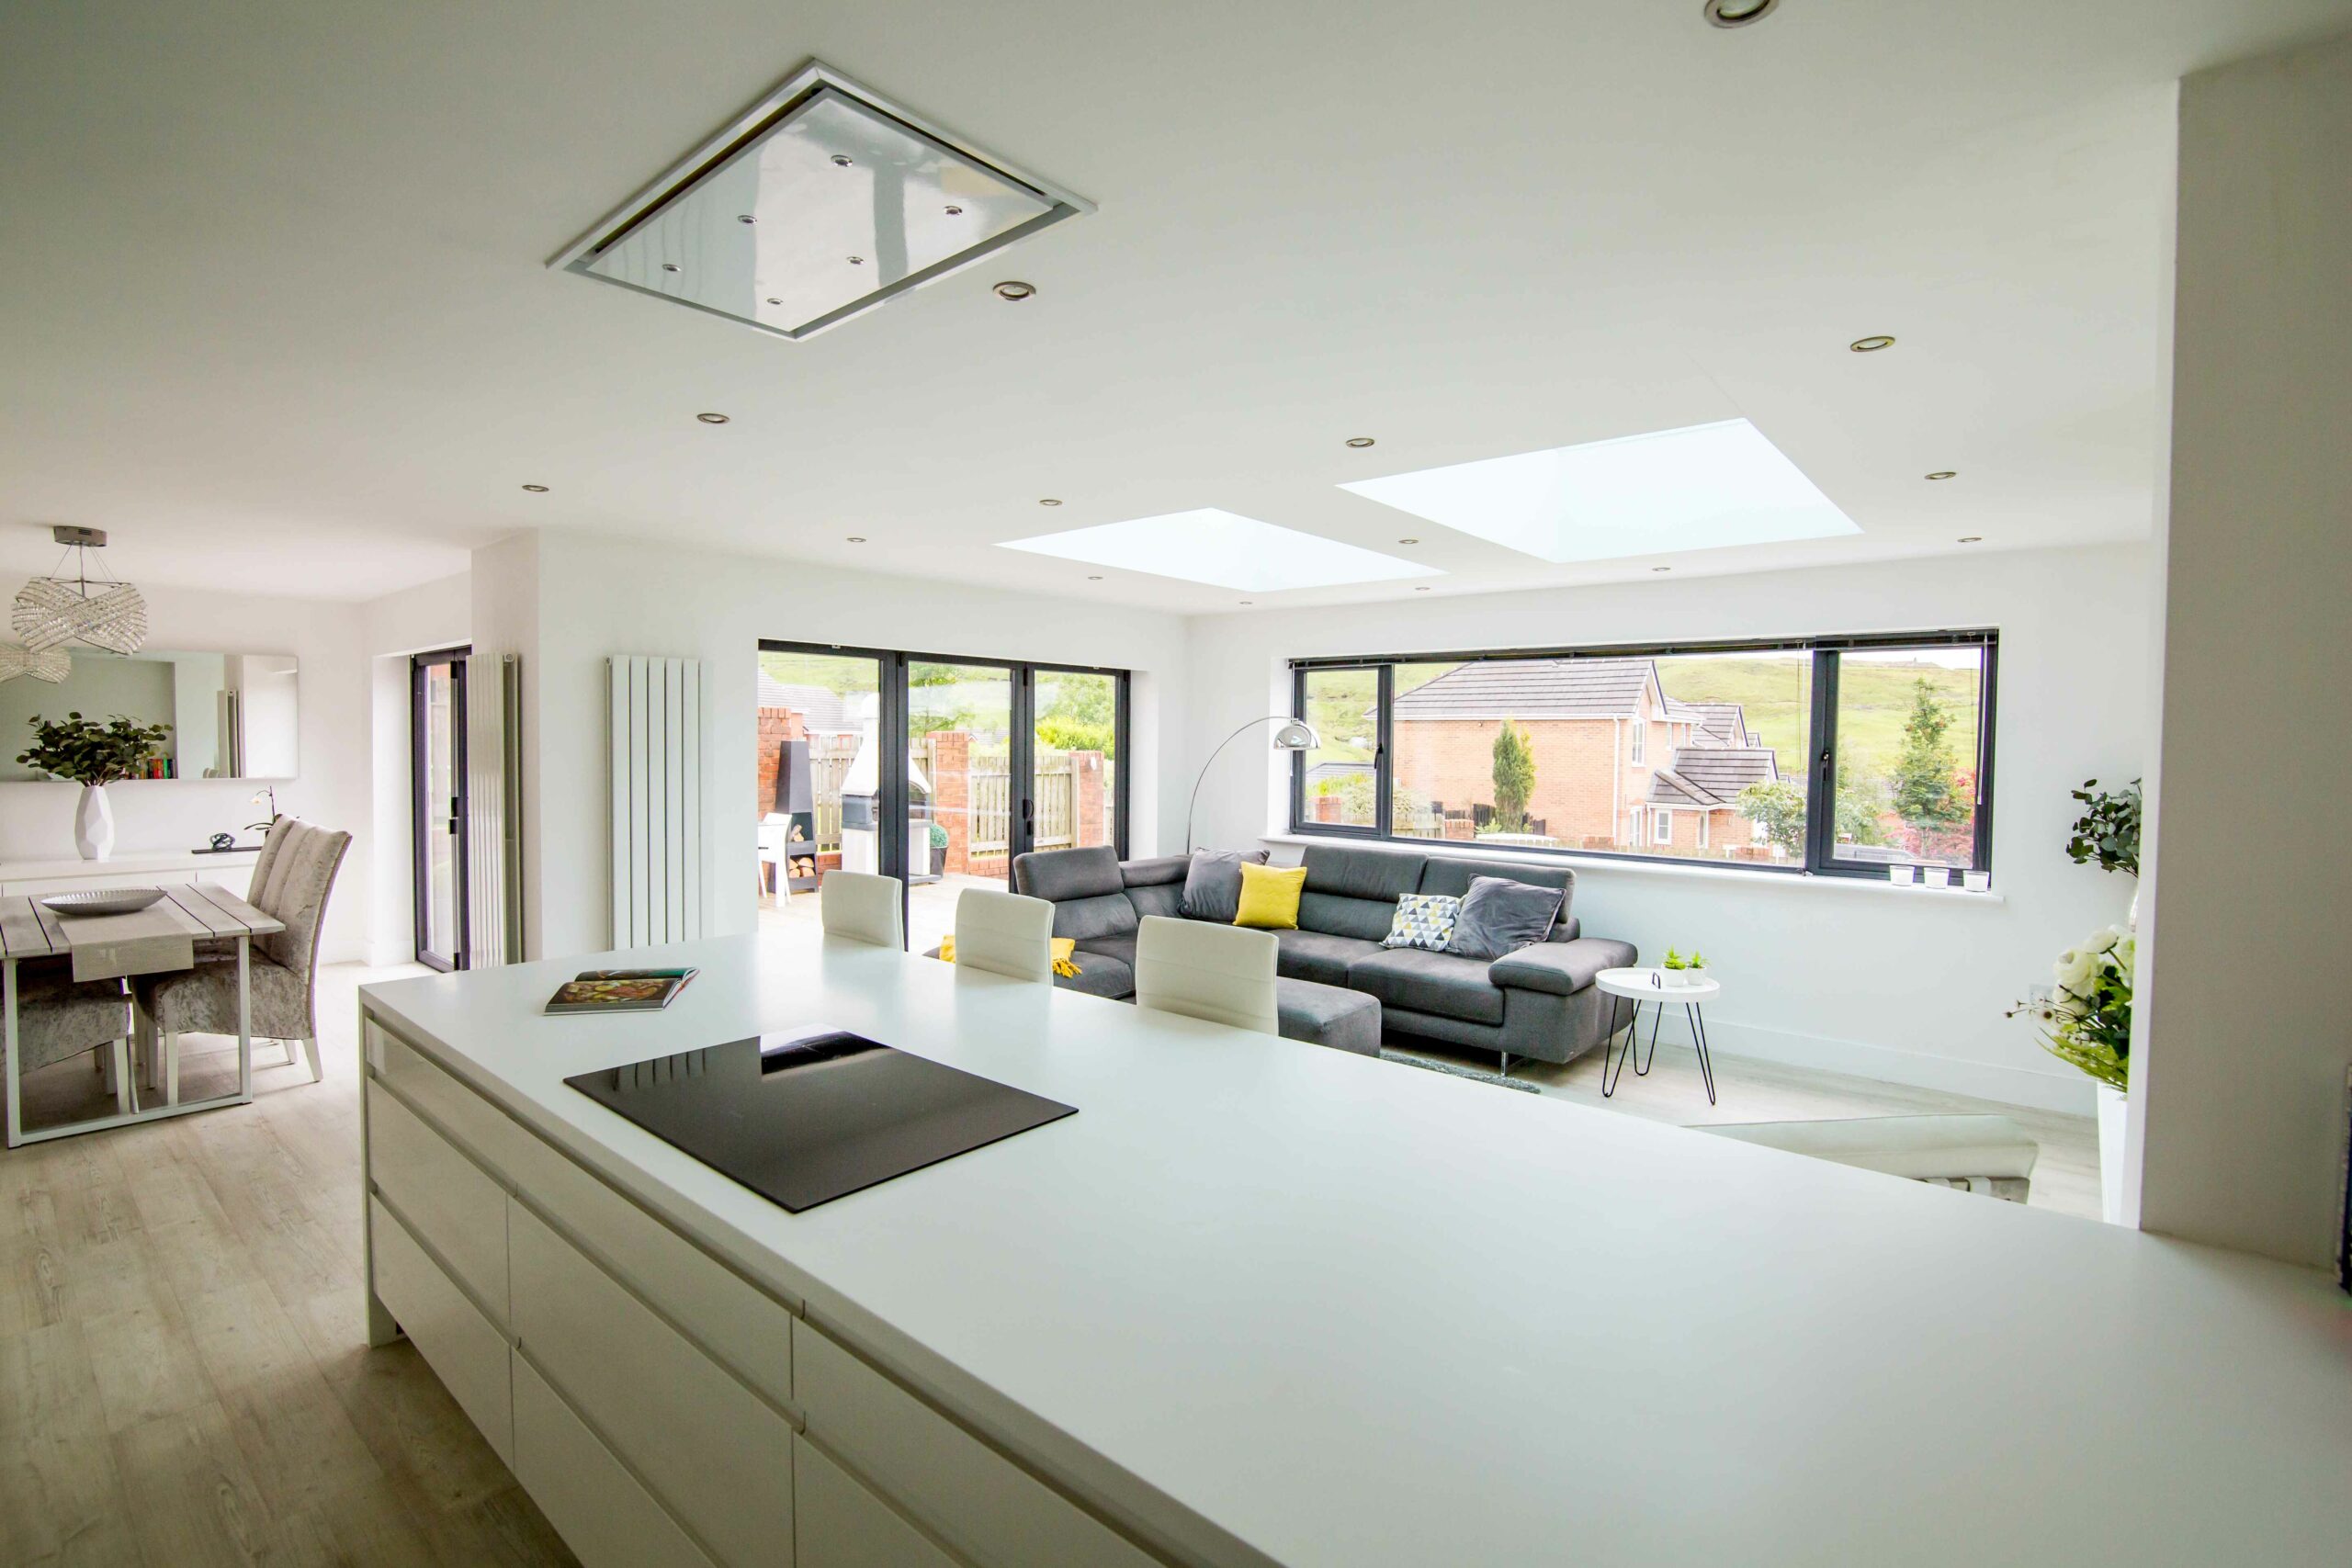 hup! House Extensions – The Future of Home Improvement